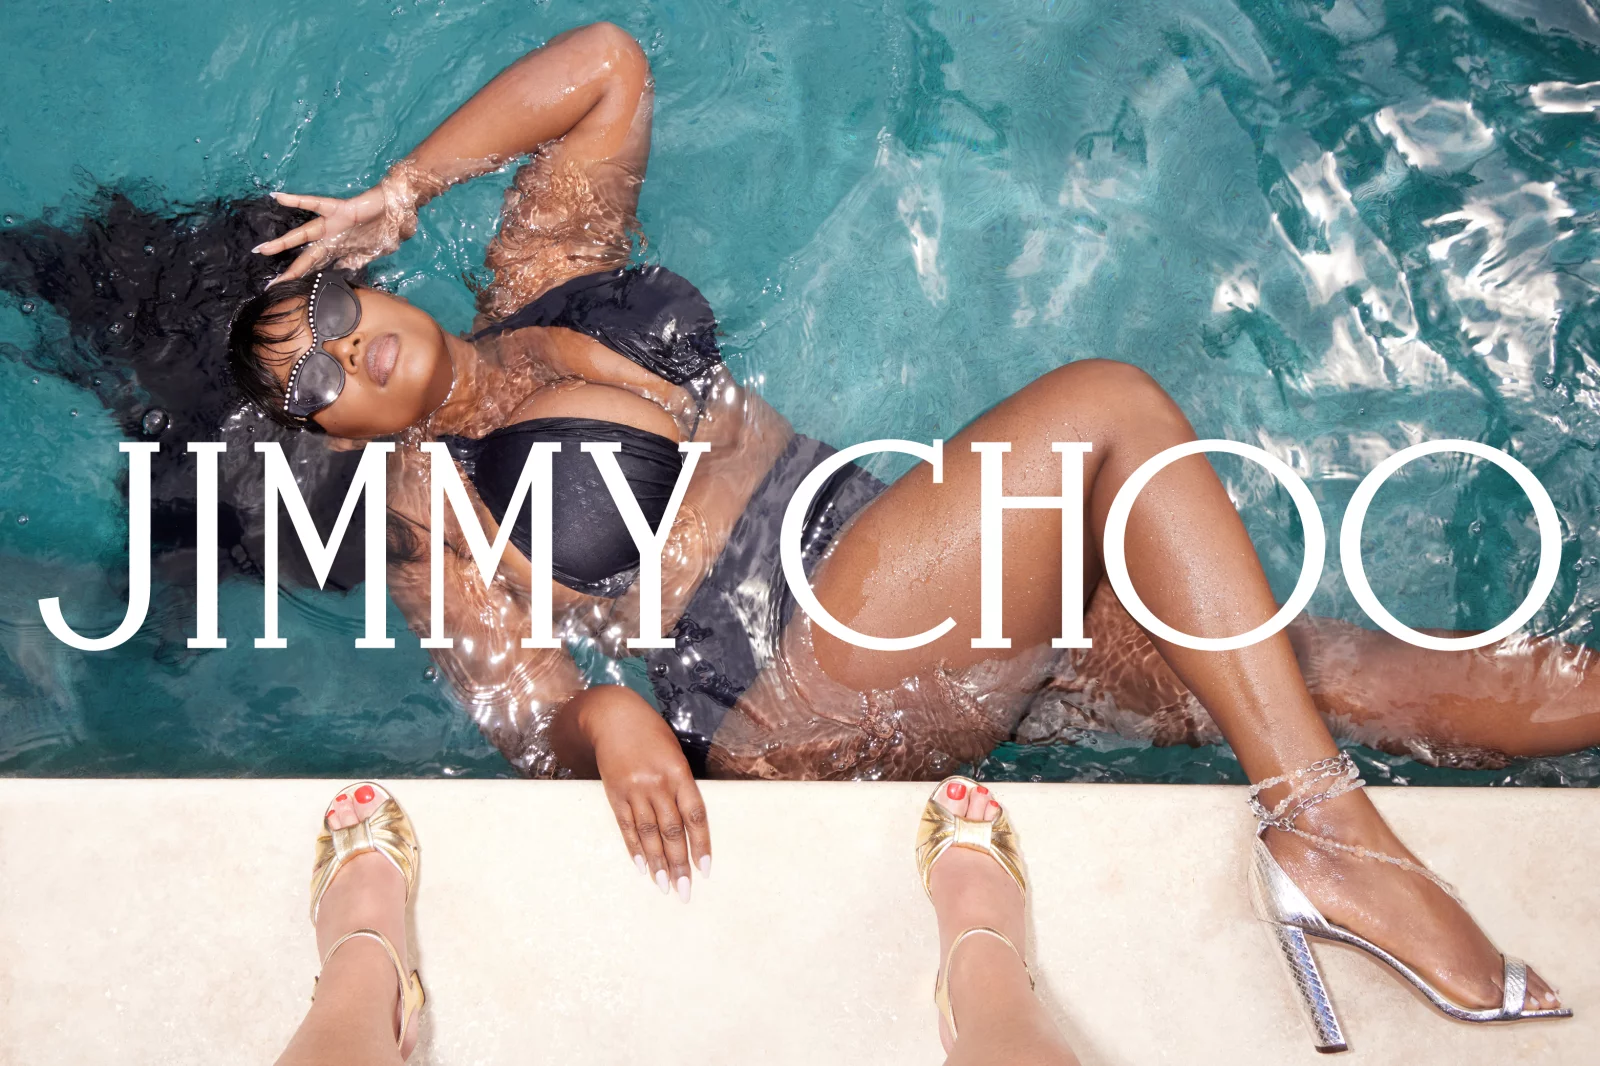 Jimmy Choo 7 by Claire ROTHSTEIN